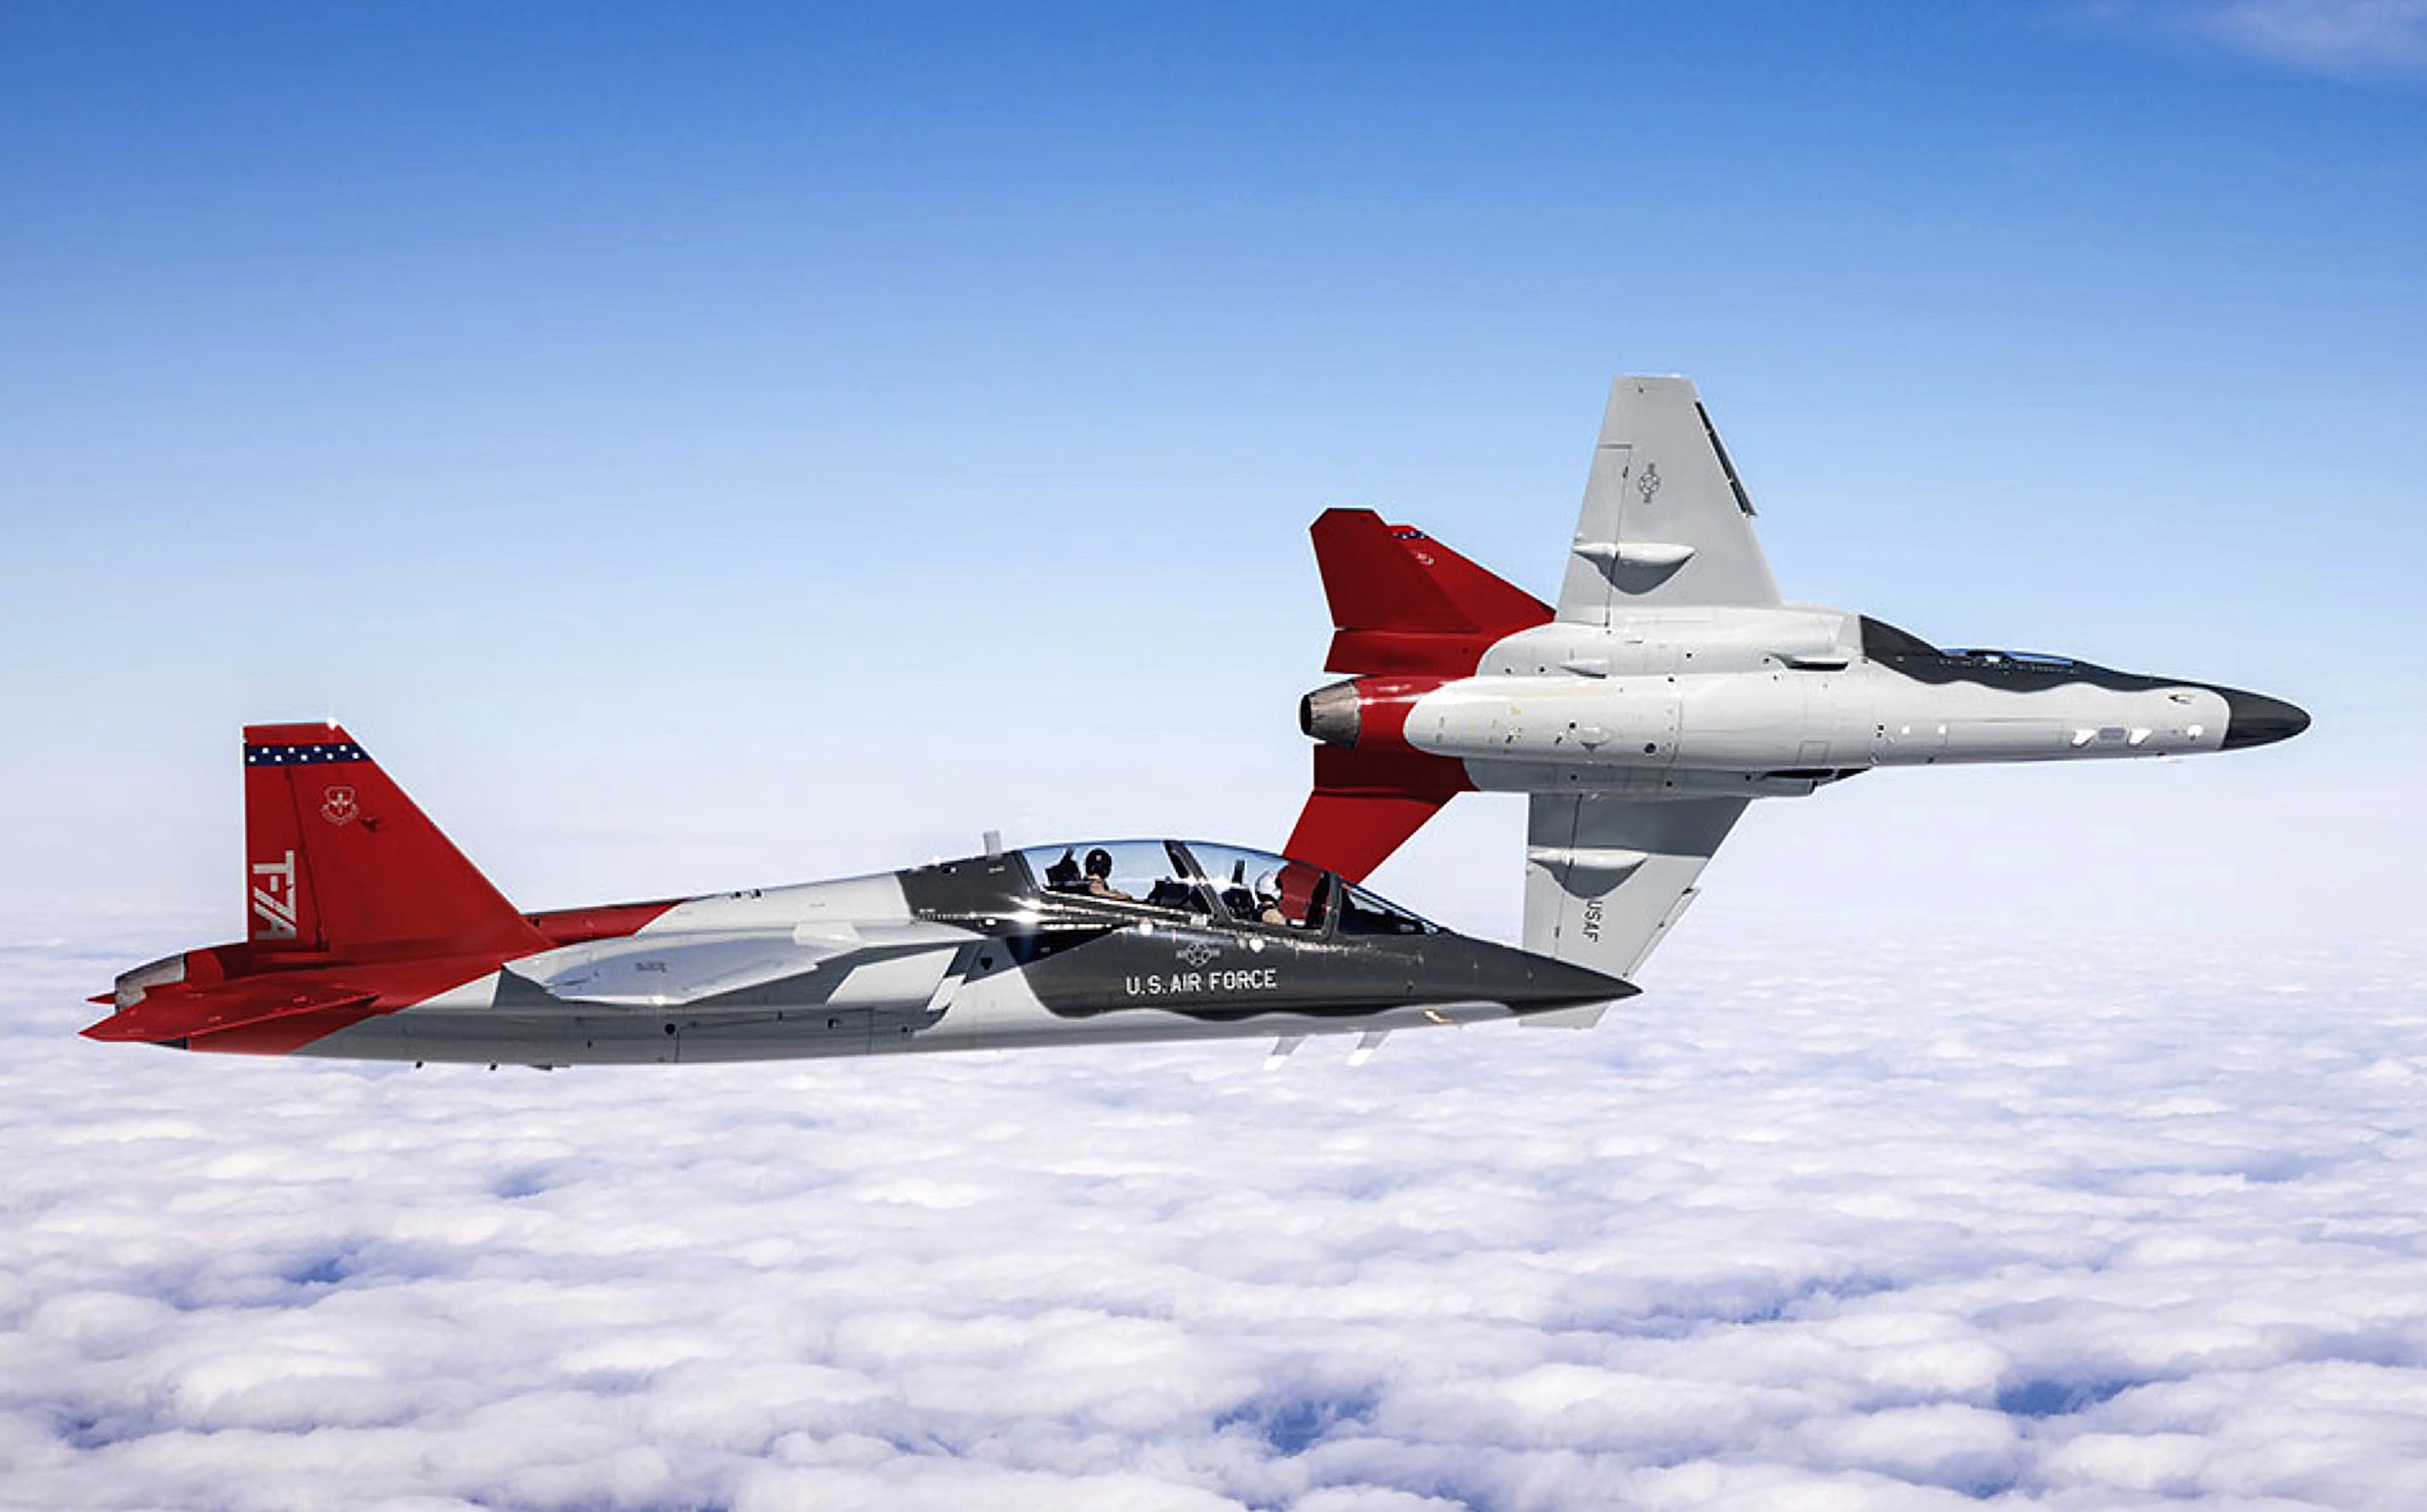 The US Air Force will be forced to invest in older T-38 Talon aircraft due to the delayed delivery of the T-7 Red Hawk